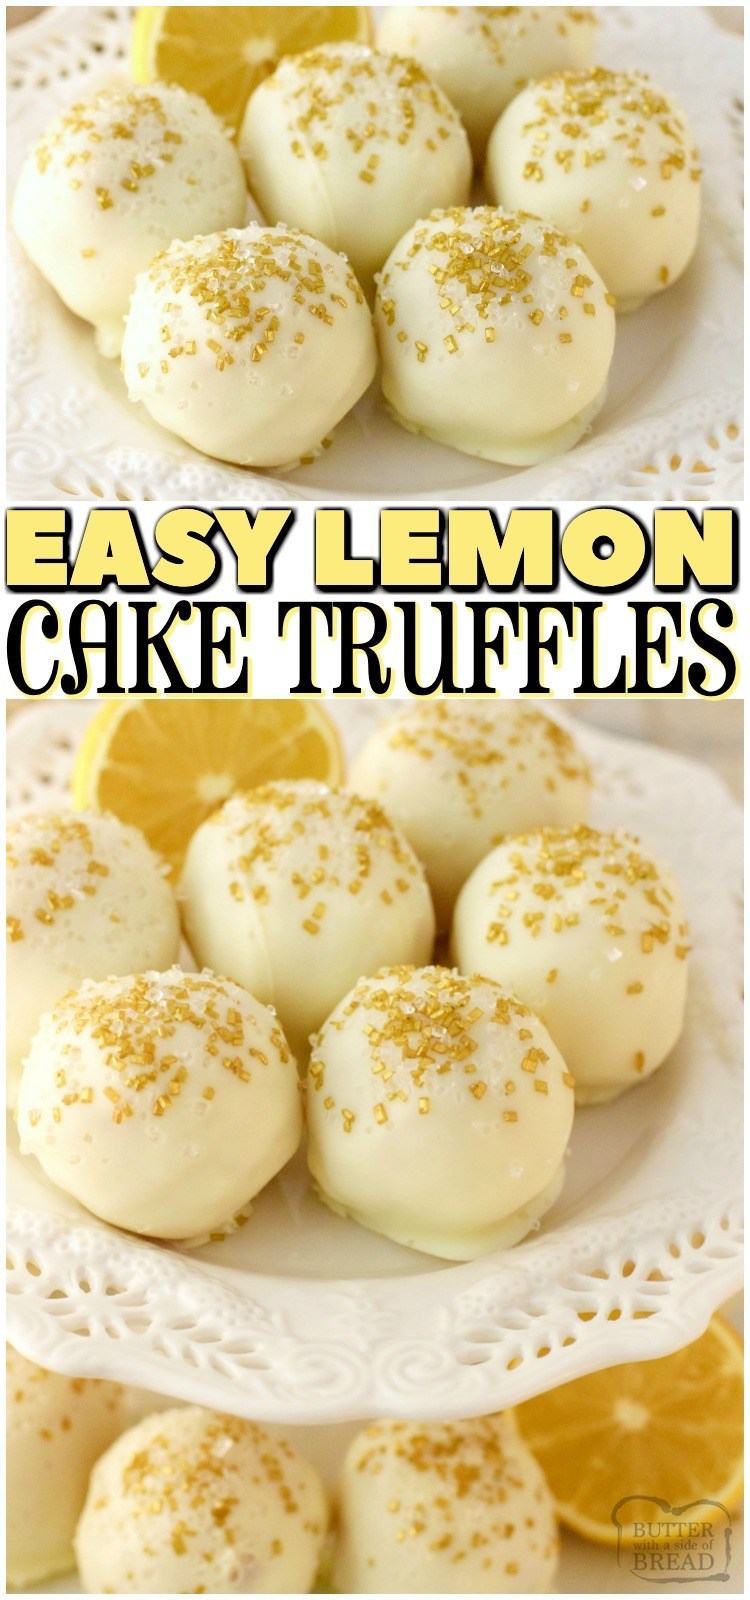 Lemon Cake Truffles made easy with lemon pound cake crumbled and formed into small truffles, then dipped in white chocolate! Easy Lemon Truffles perfect for parties! #lemon #cake #cakeballs #truffles #chocolate #whitechocolate #parties #dessert #fingerfood #recipe from BUTTER WITH A SIDE OF BREAD